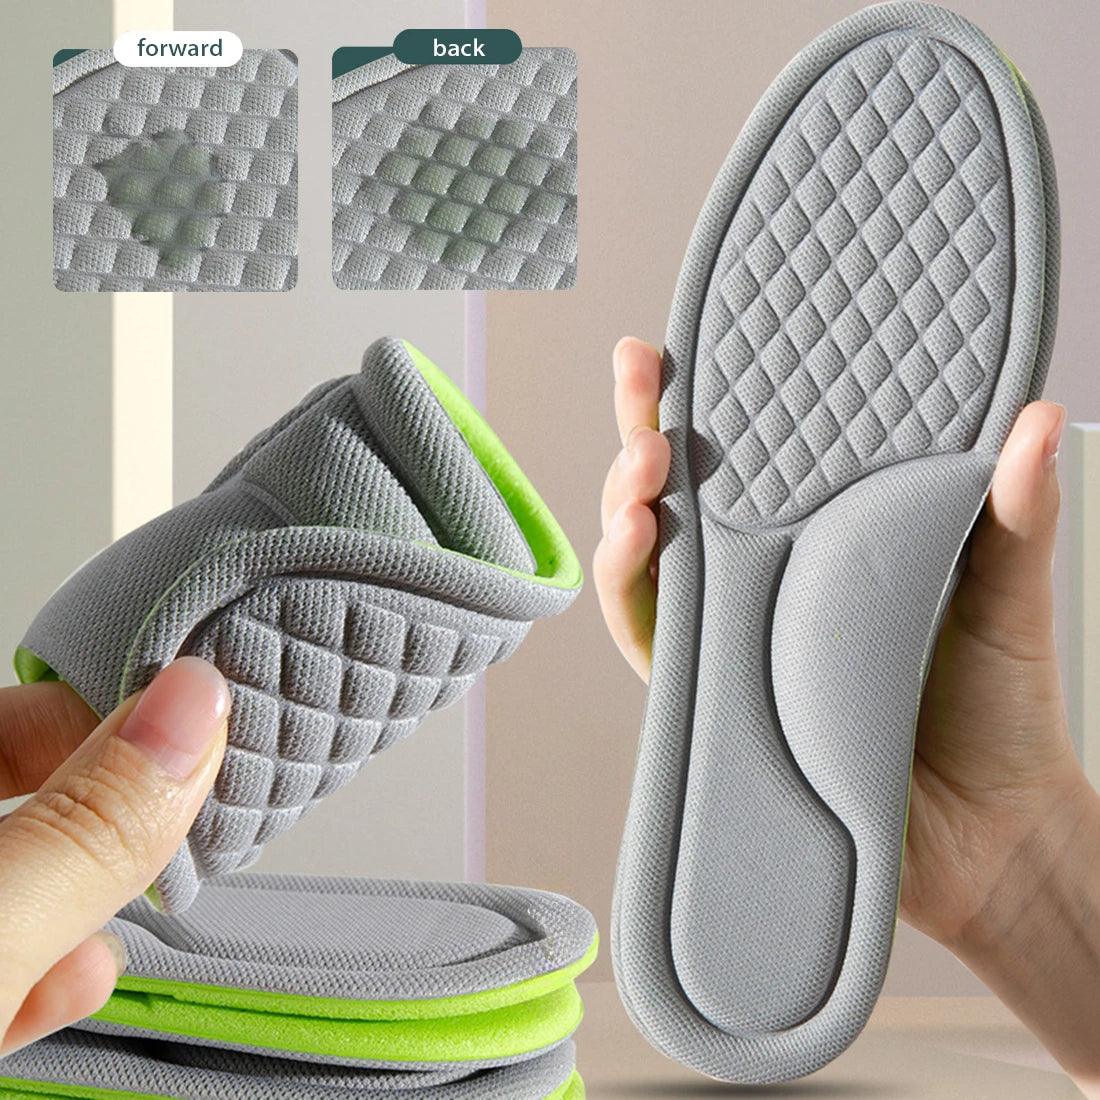 Orthopedic Memory Foam Sports Insoles with Odor Control and Sweat Absorption  ourlum.com   